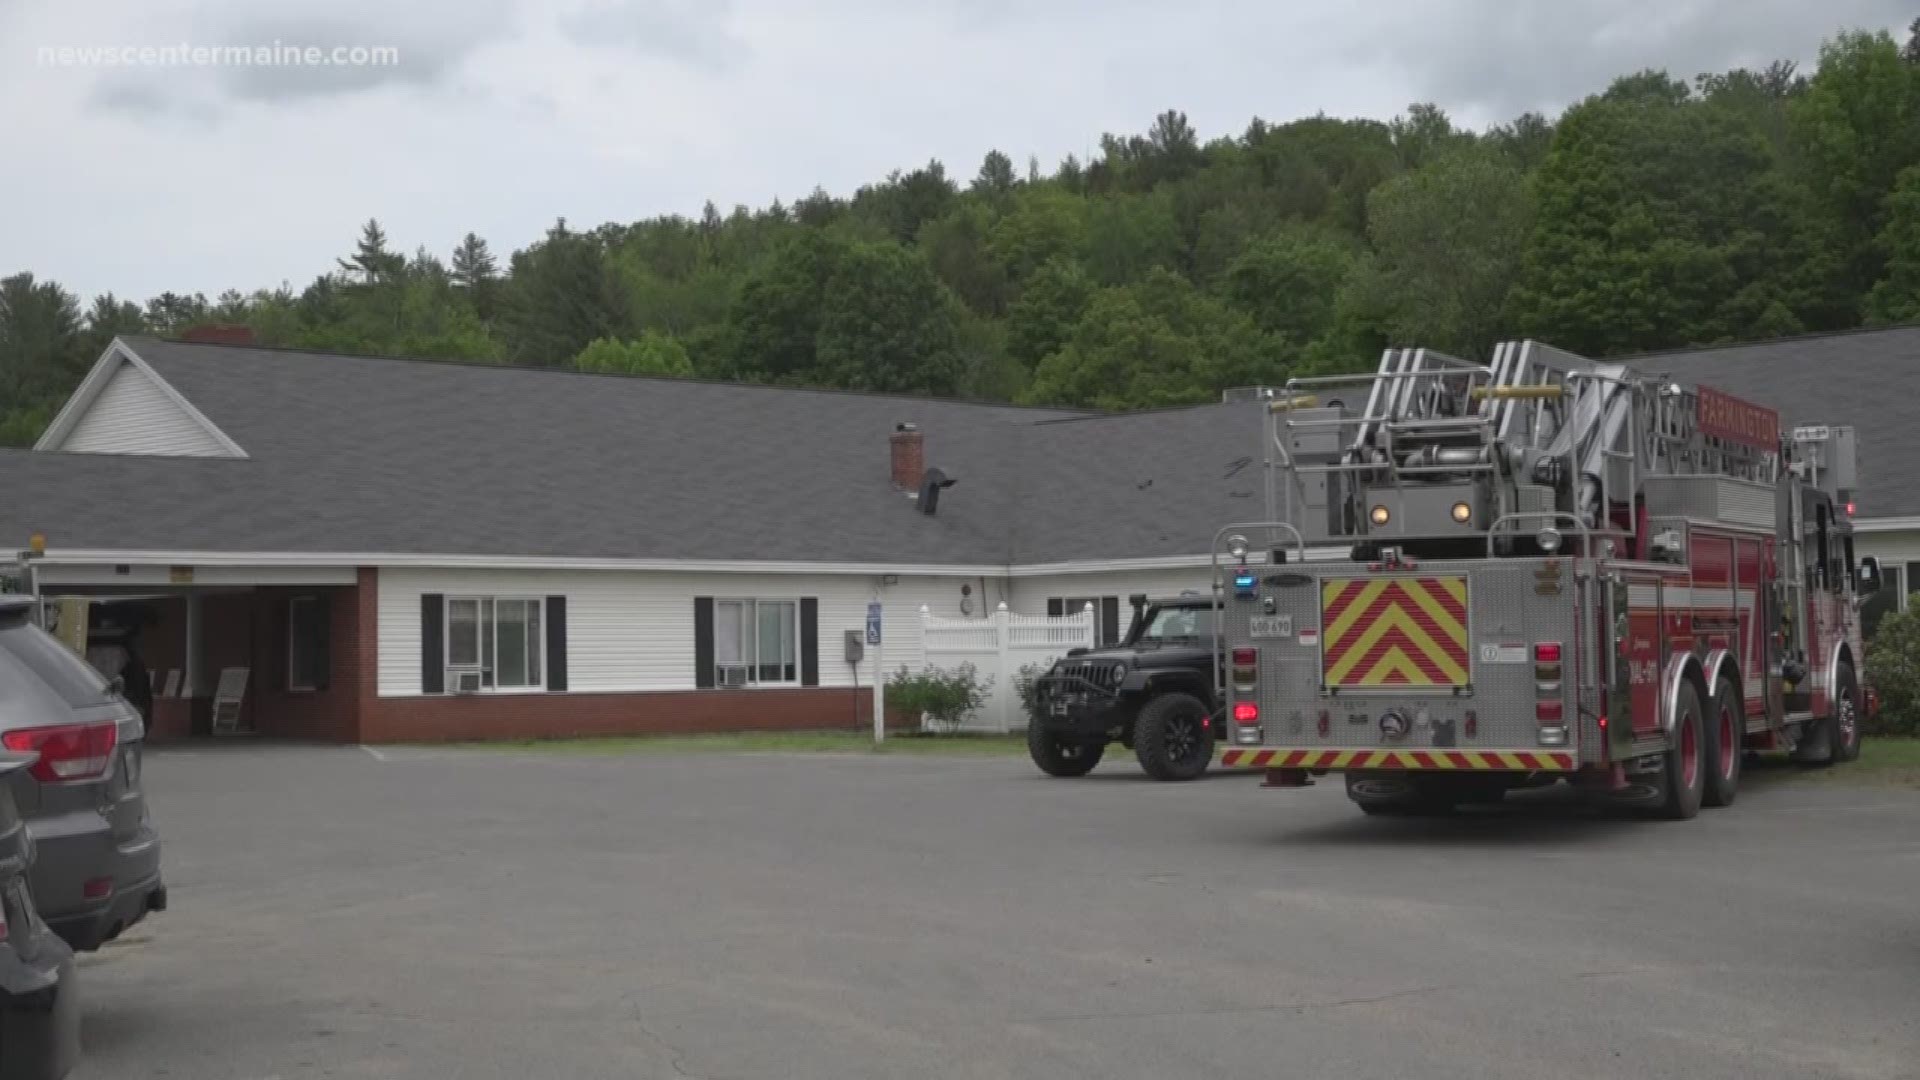 More than 40 senior citizens are without a home after a fire damaged a housing facility in Farmington.